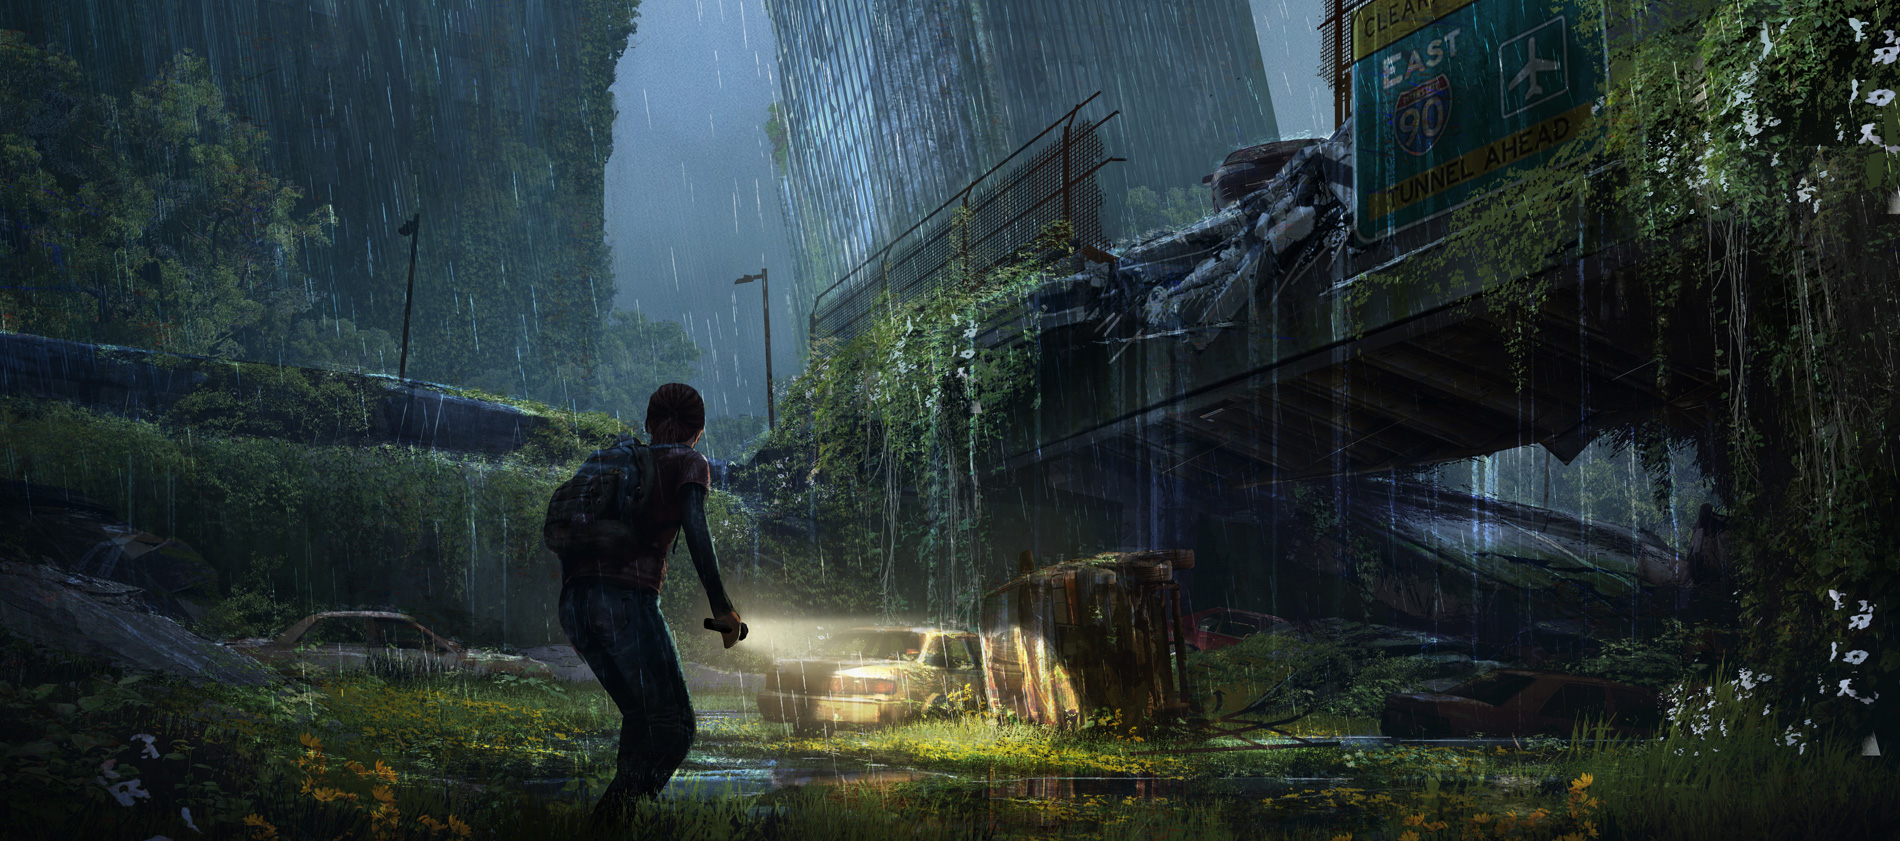 Game Studio Naughty Dog shares 'The Last of Us' Concept Art